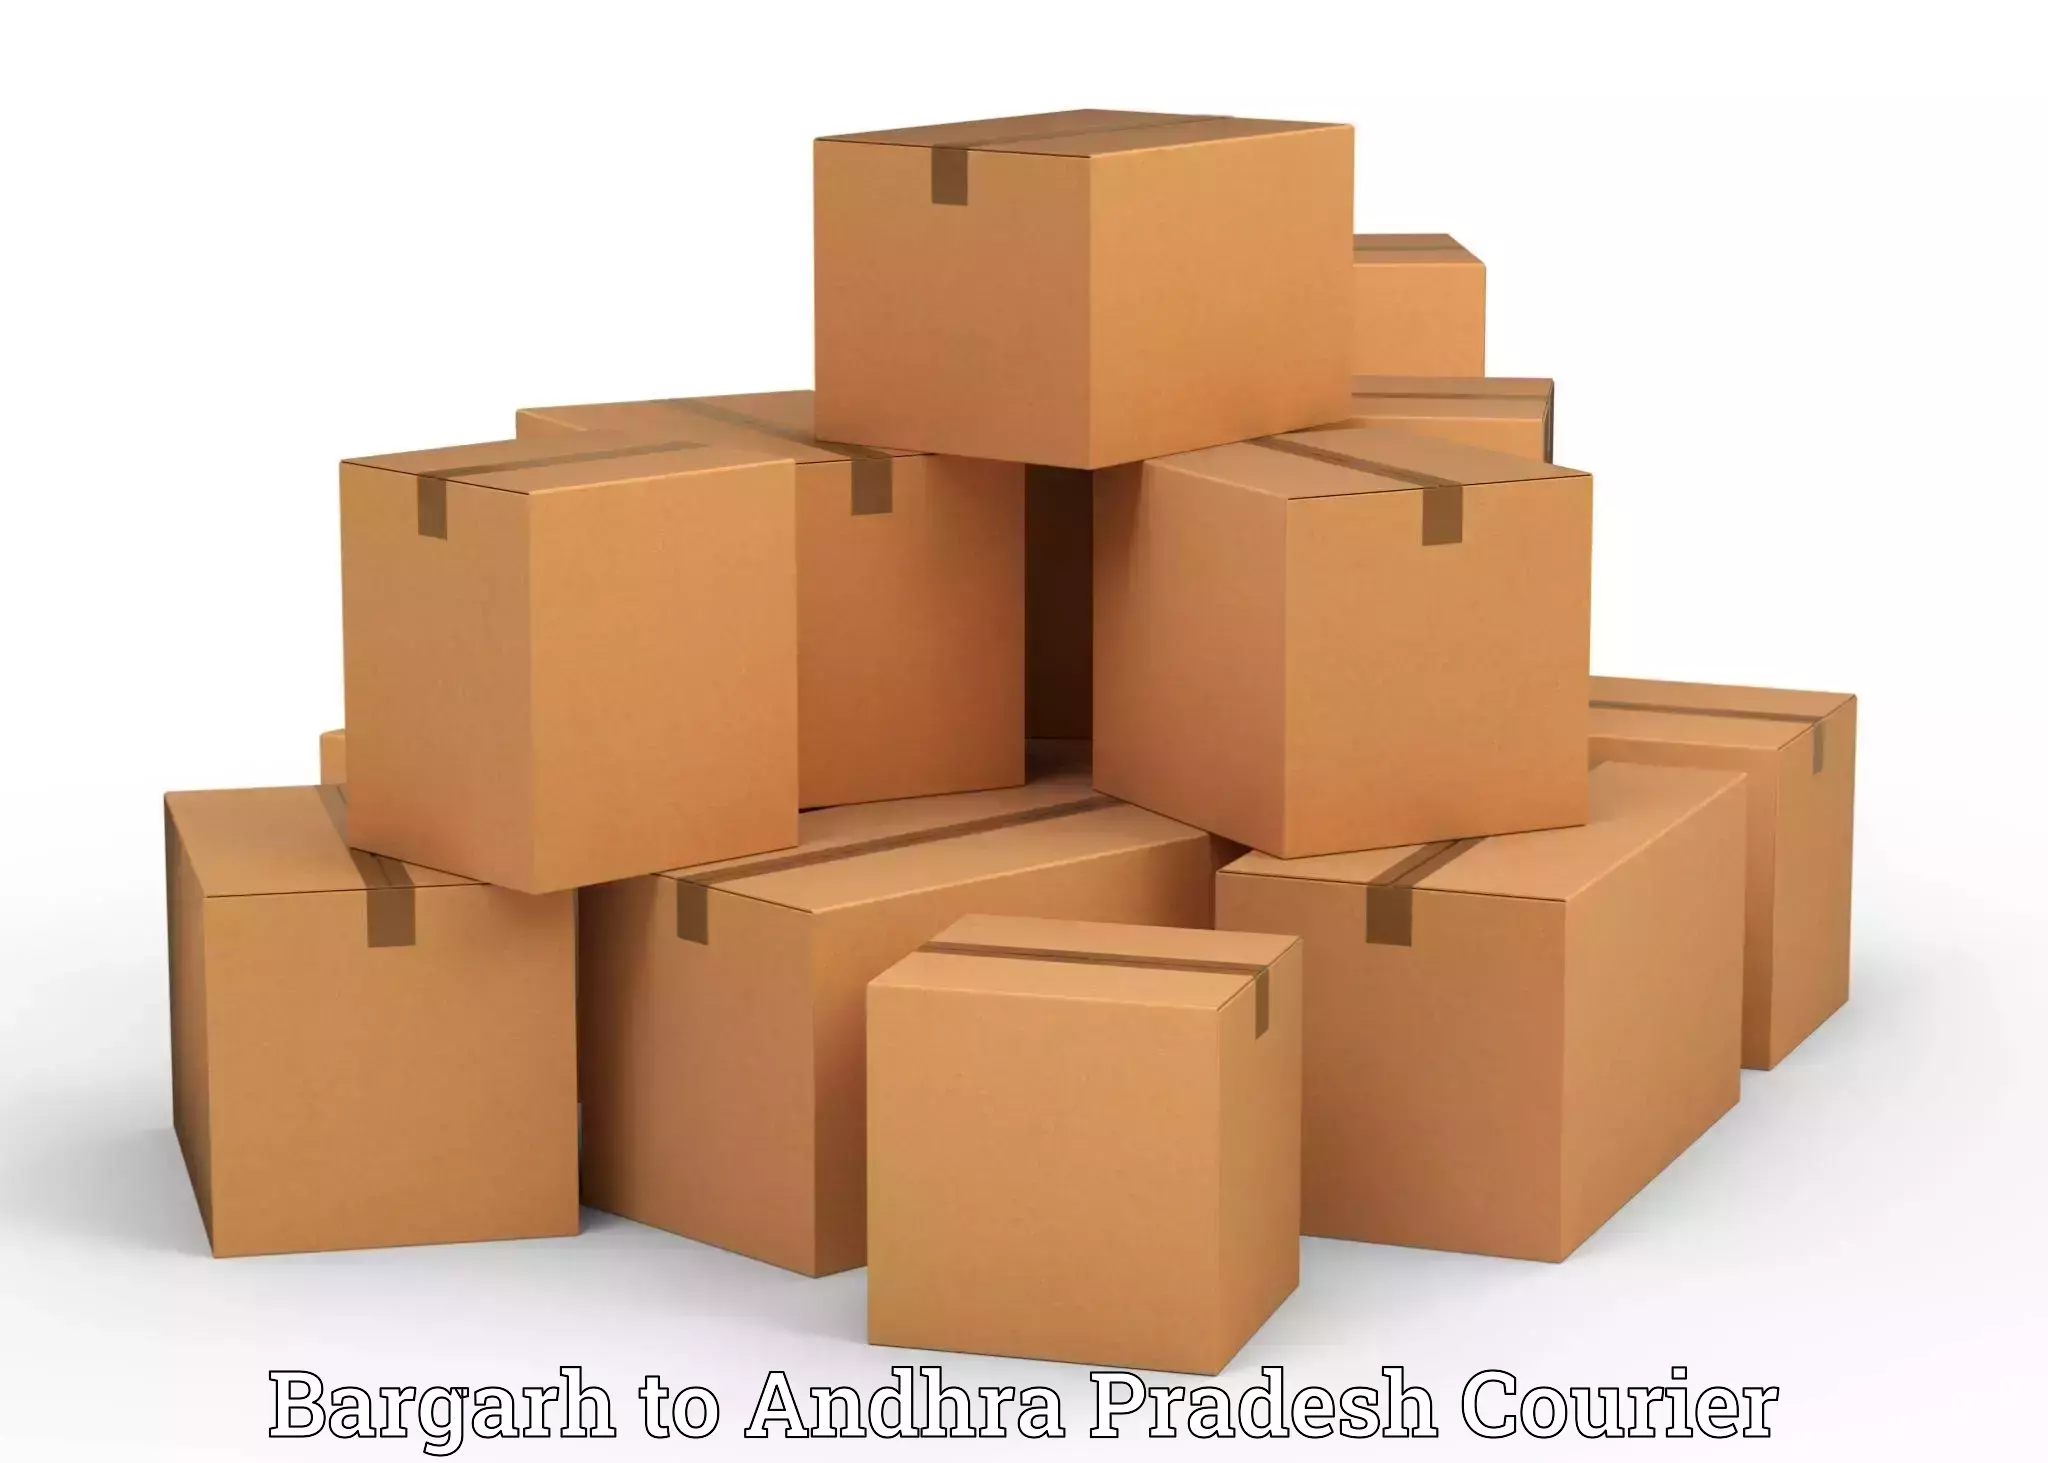 Efficient relocation services in Bargarh to Visakhapatnam Port